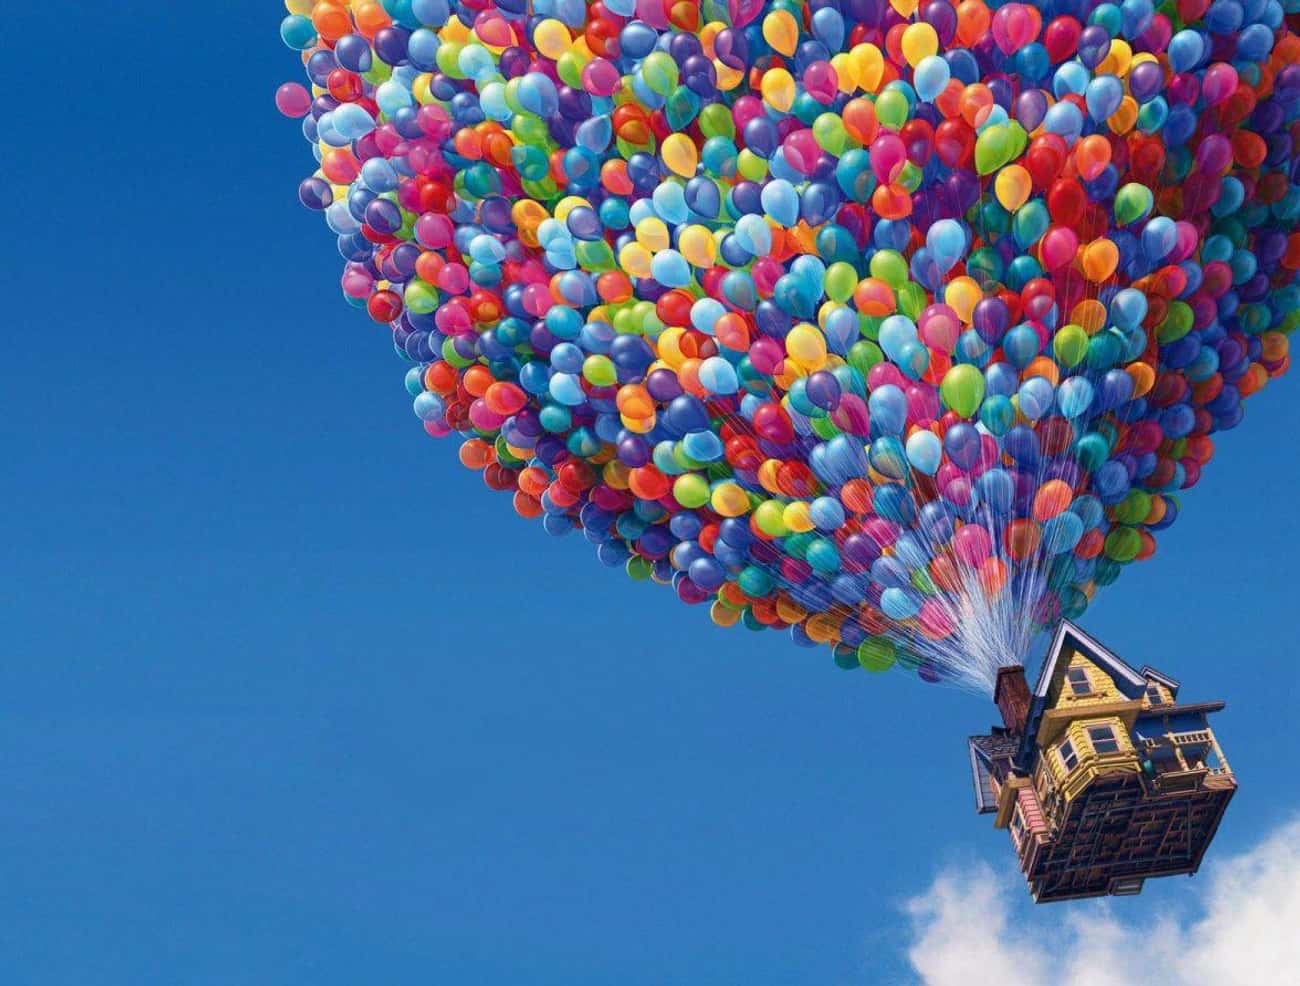 National Geographic Recreated The House From 'Up'